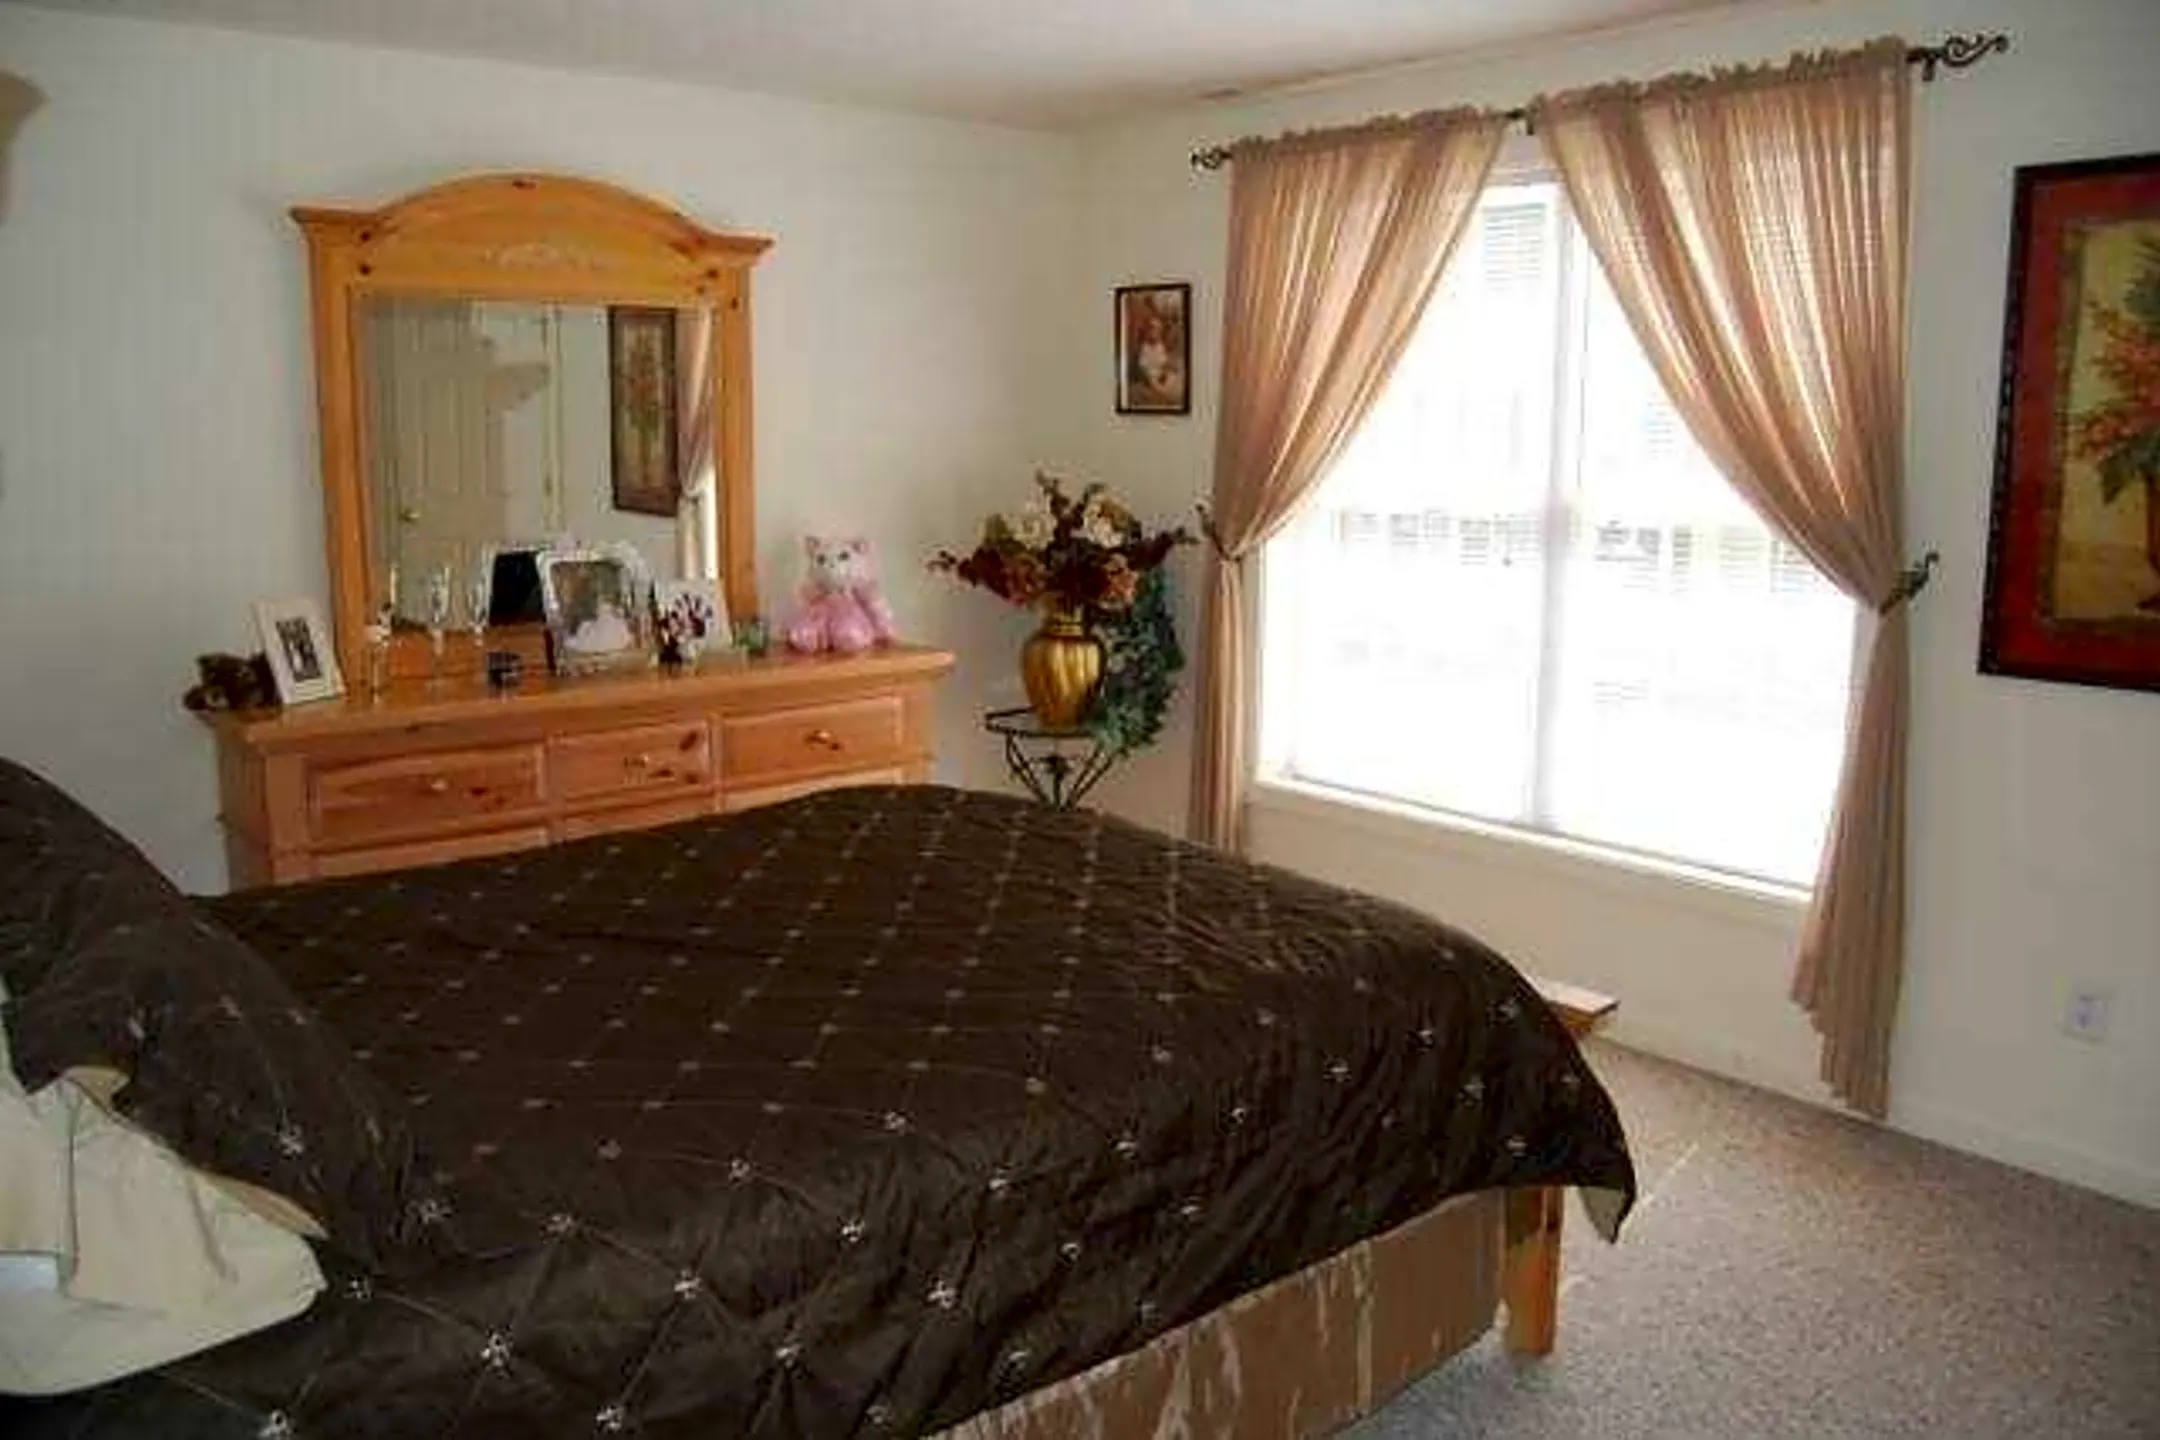 Bedroom - Whitetail Crossing - Manchester, NH